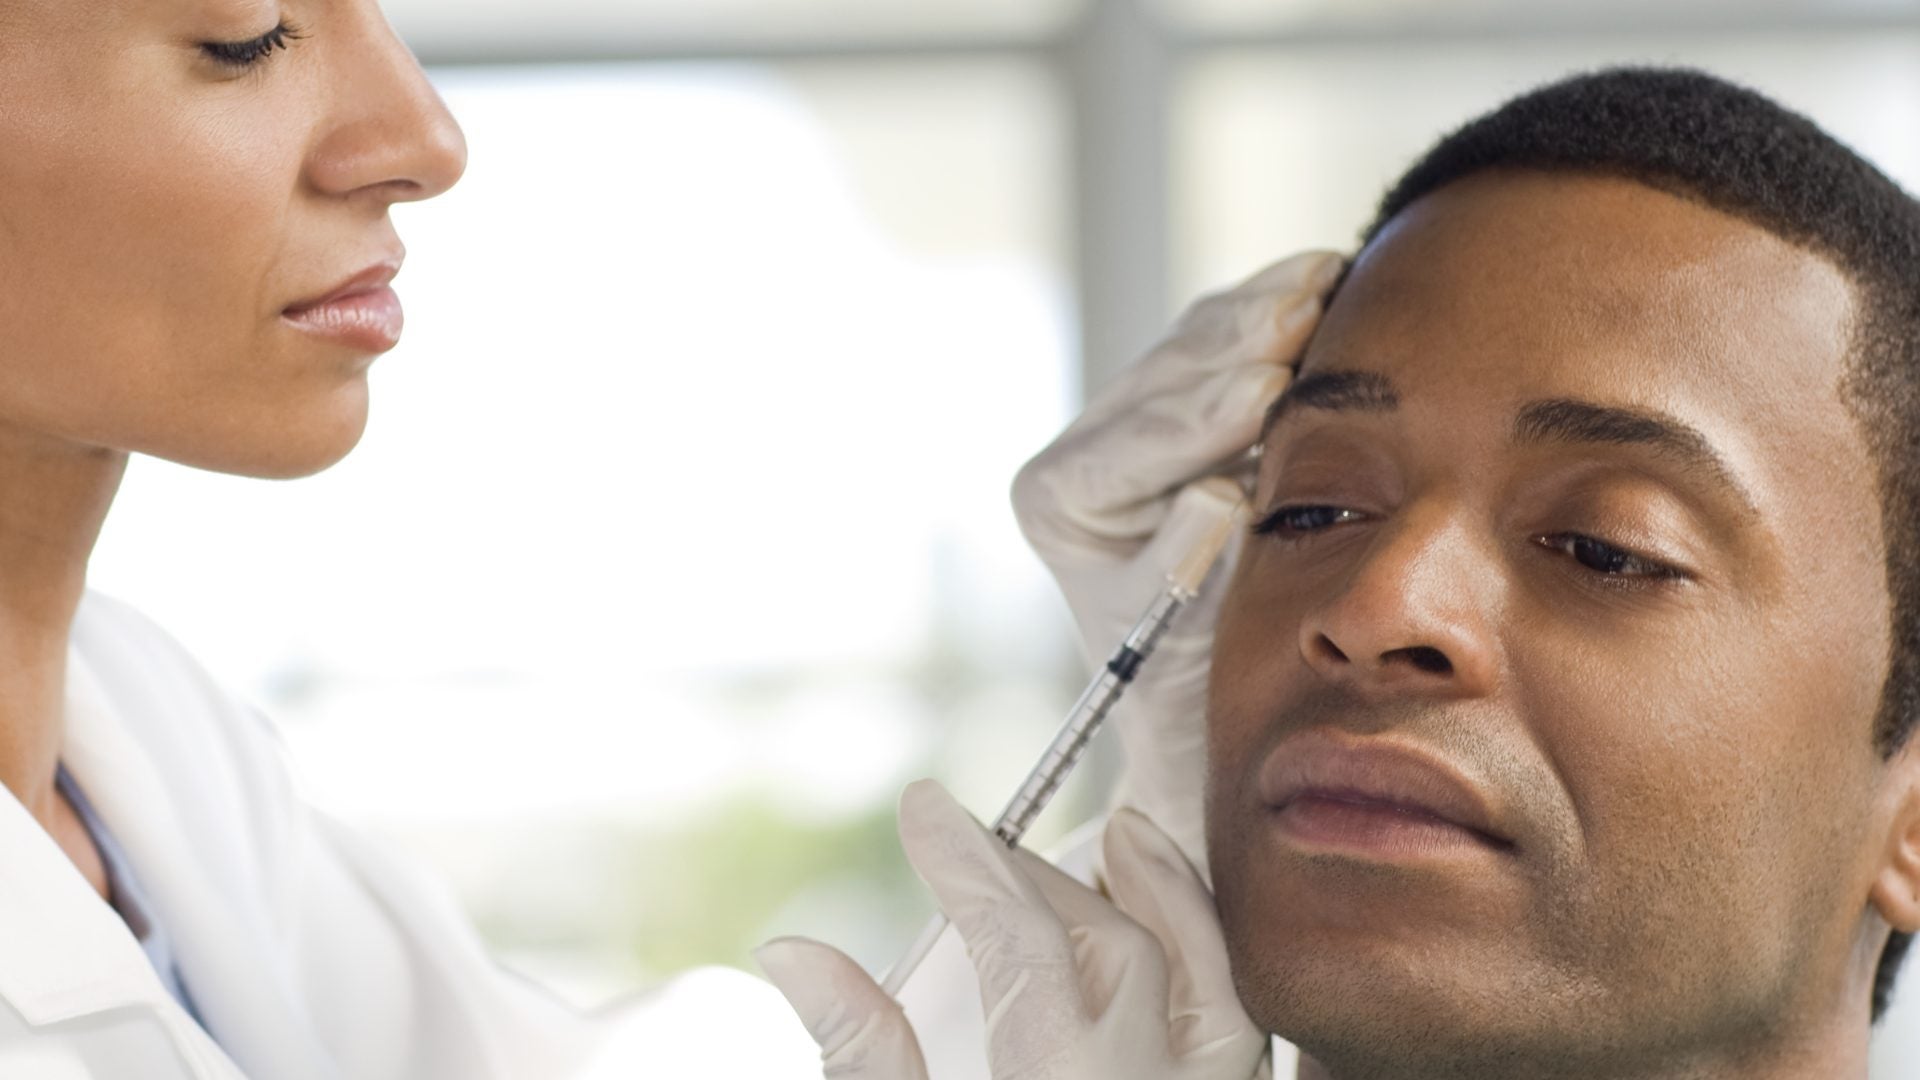 Why I Refuse To Get Work Done As a Black Man In The Age Of Botox and Fillers